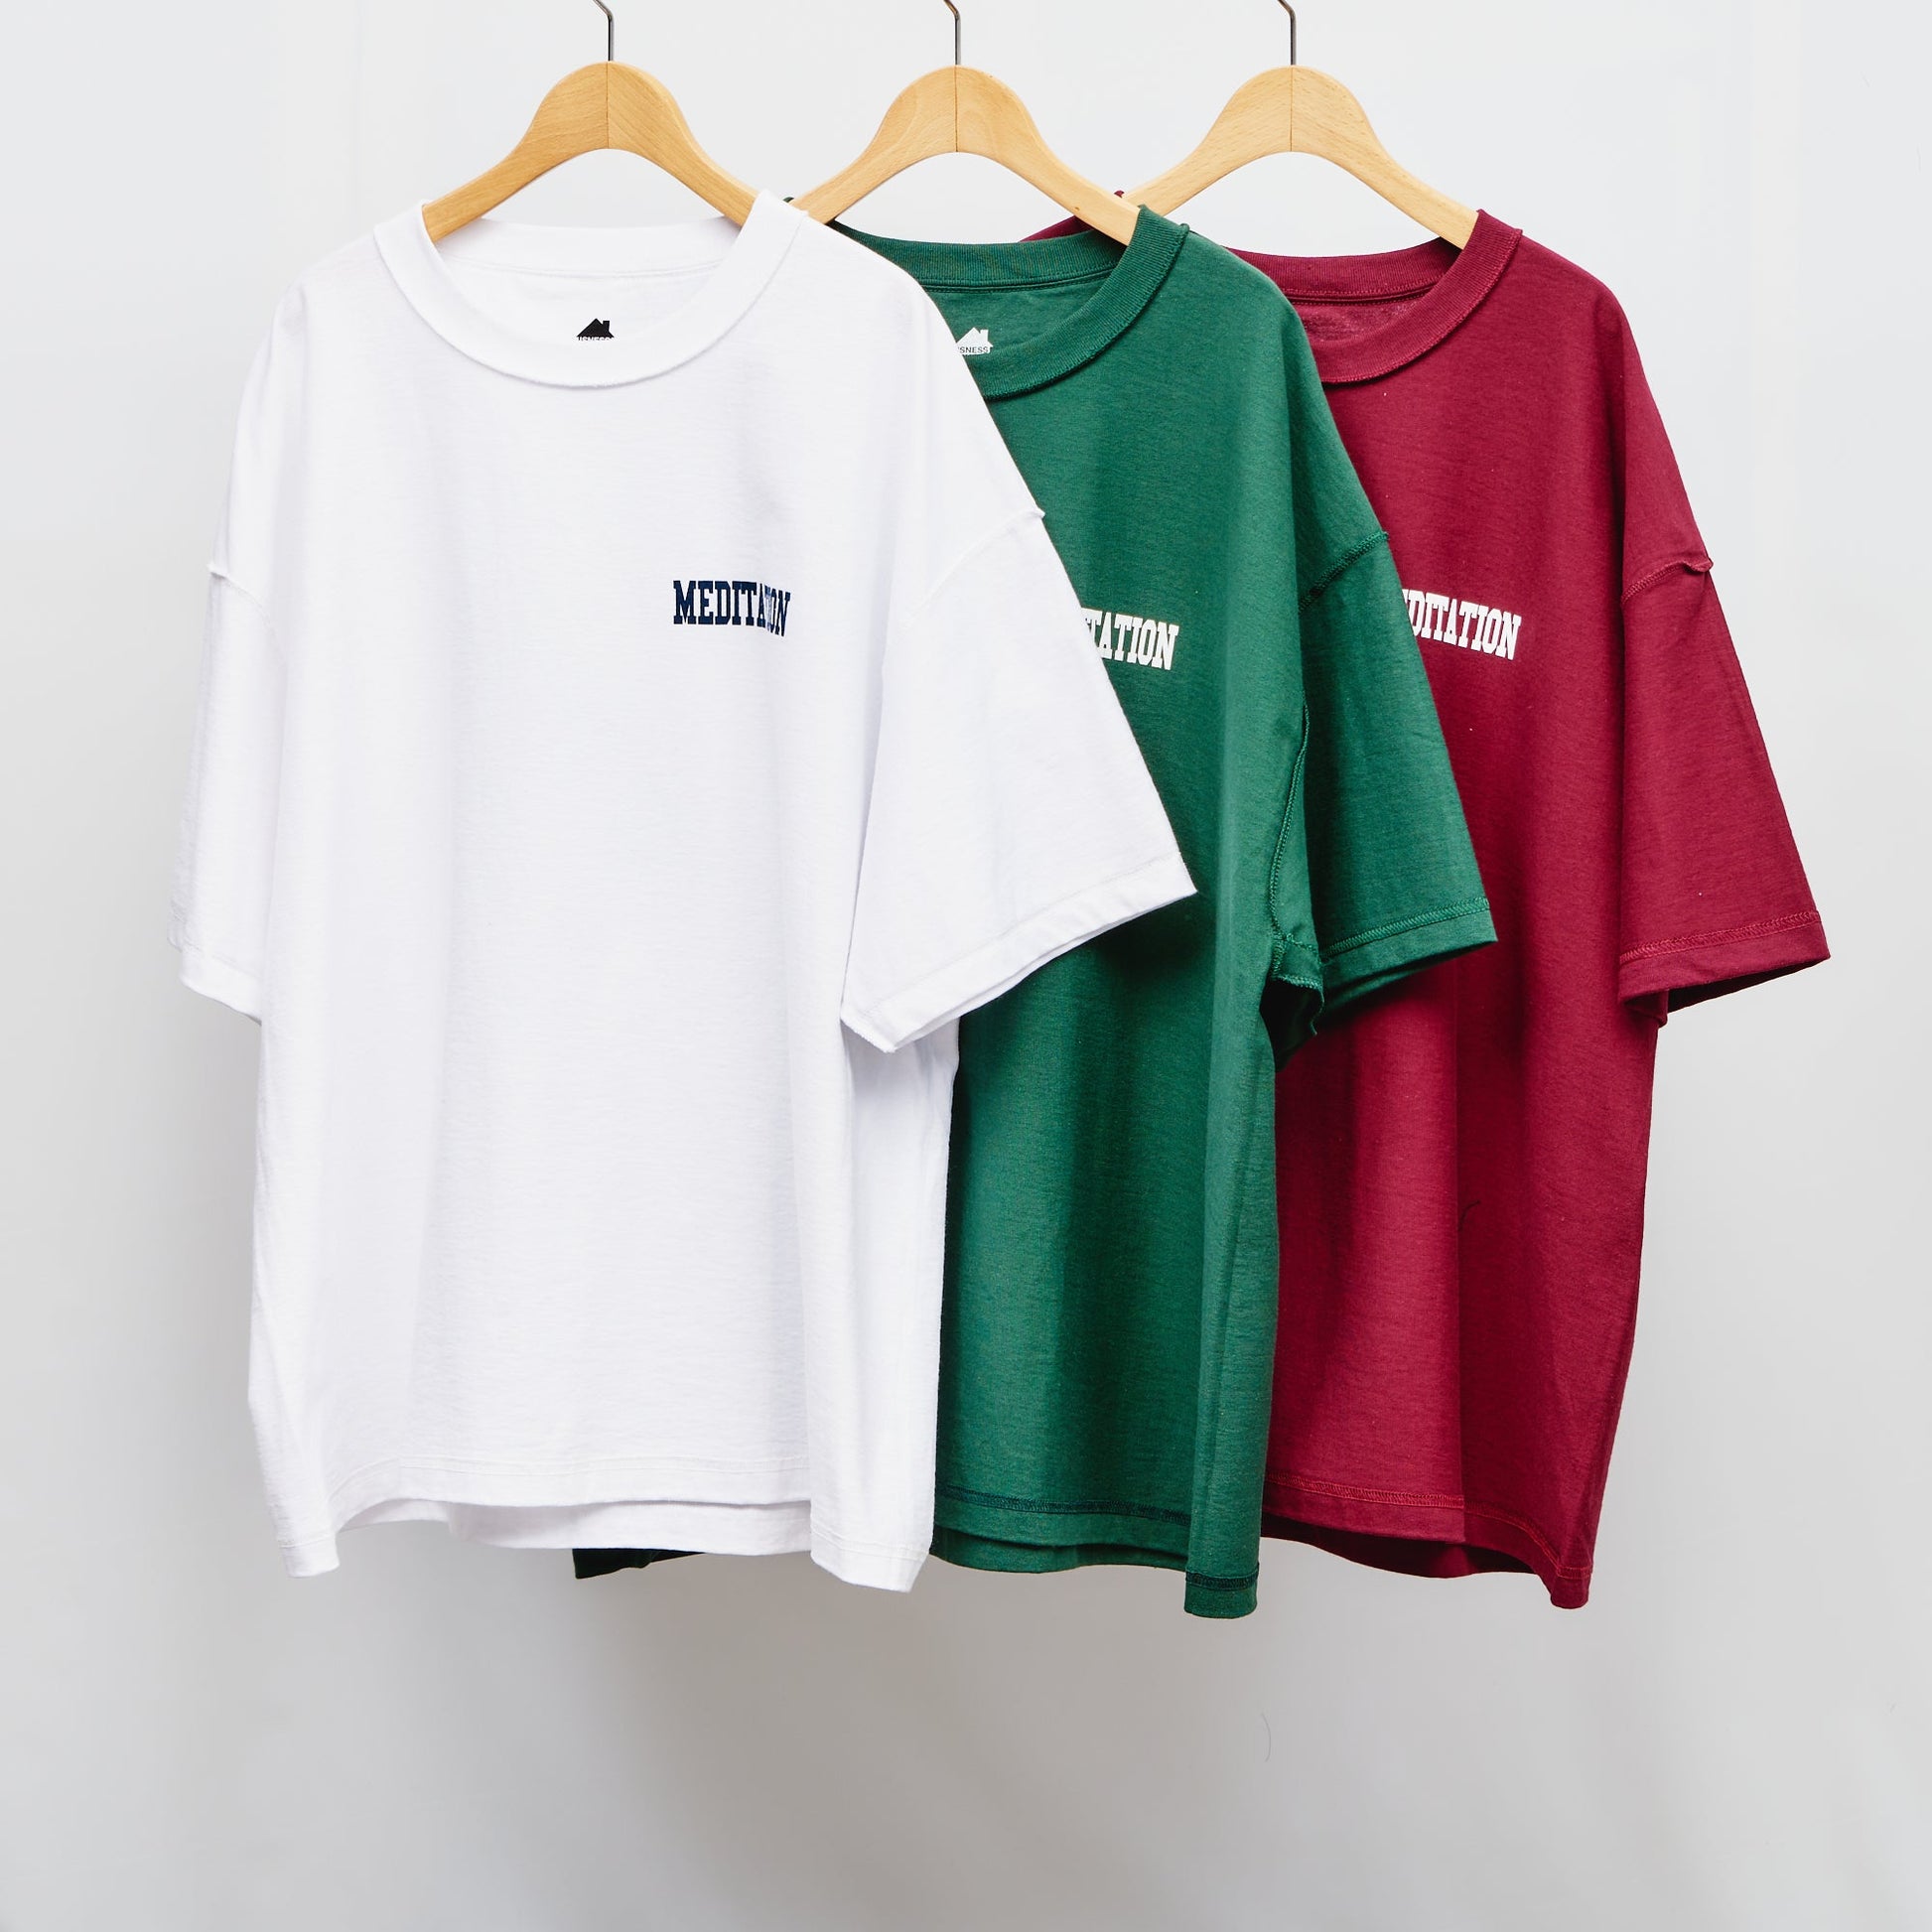 MEDITATION  S/S T-SHIRTS is-ness online shop 1